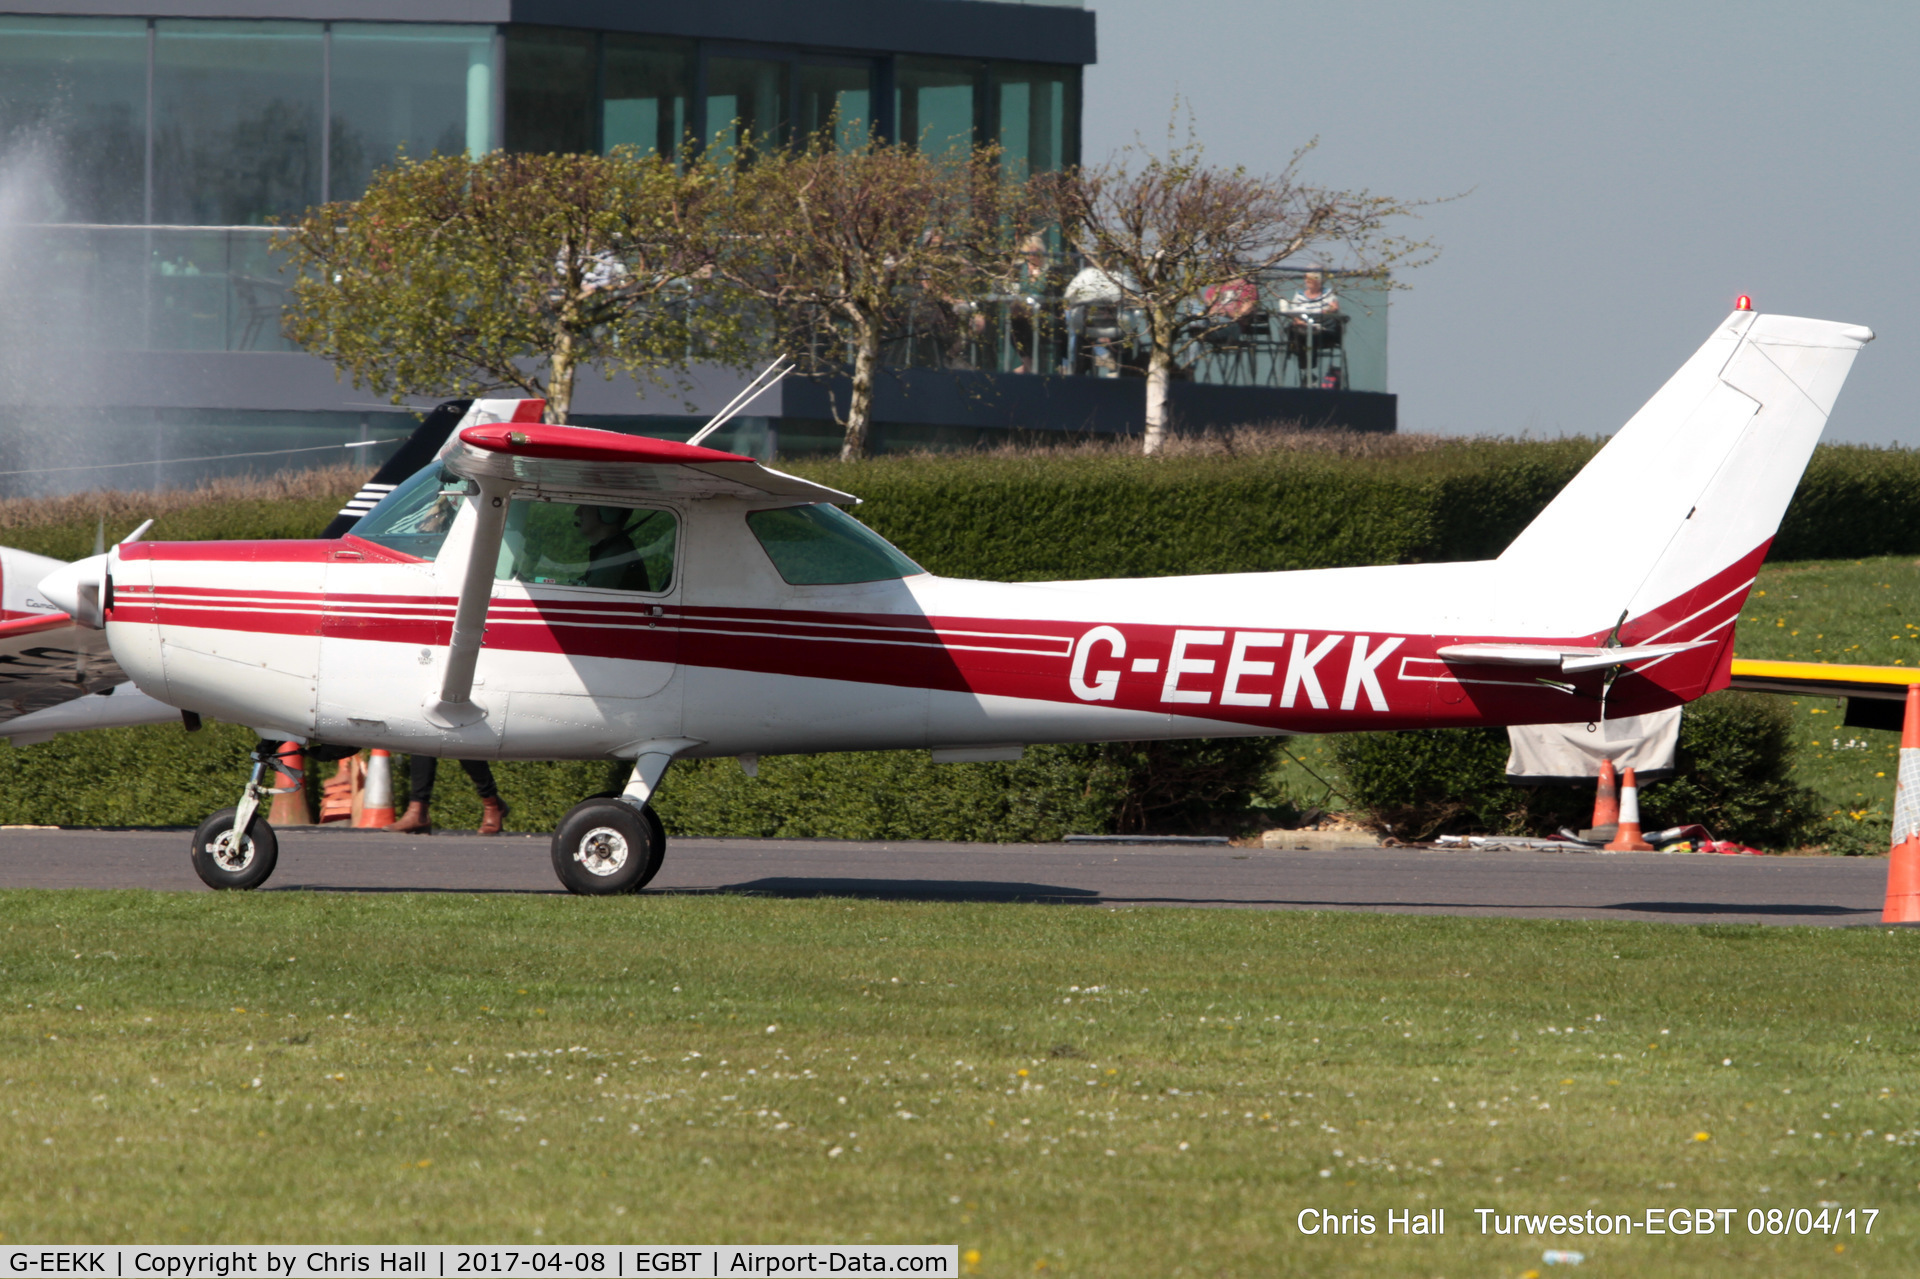 G-EEKK, 1982 Cessna 152 C/N 152-85621, at The Beagle Pup 50th anniversary celebration fly in